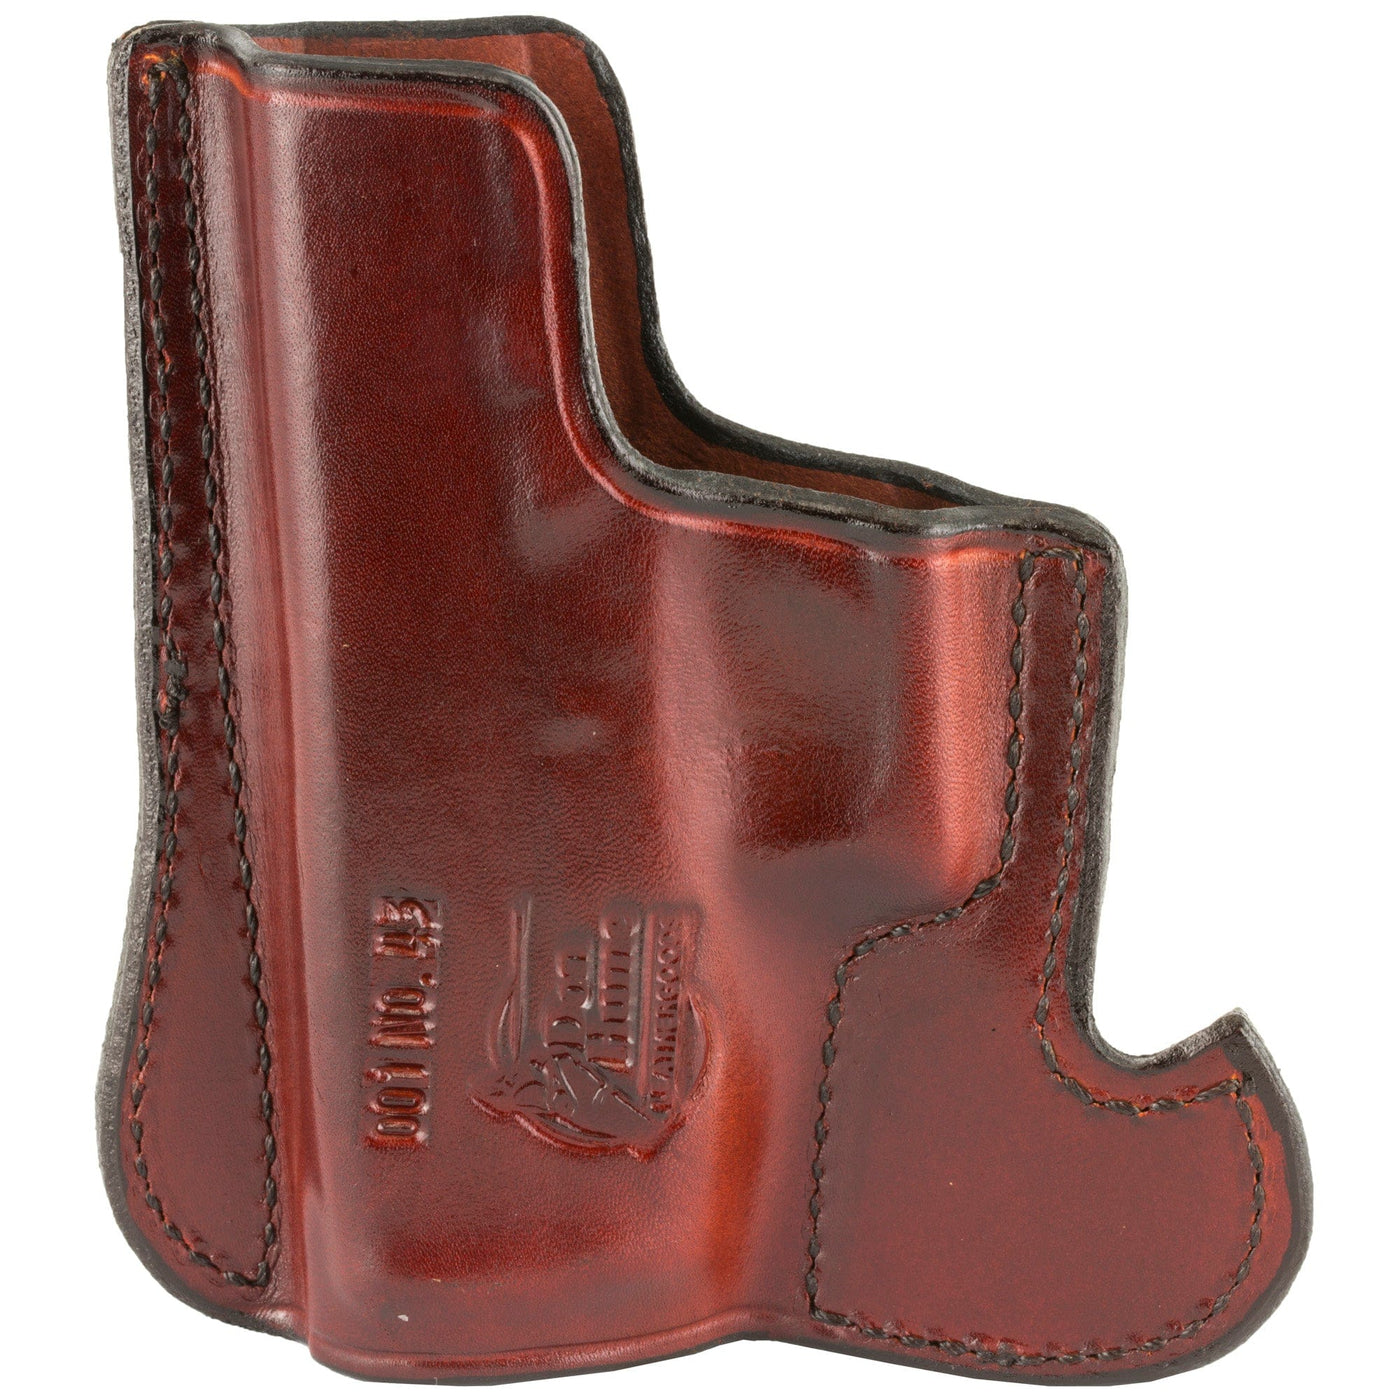 Don Hume D Hume Fr Pocket For Glock 43/43x Br Holsters